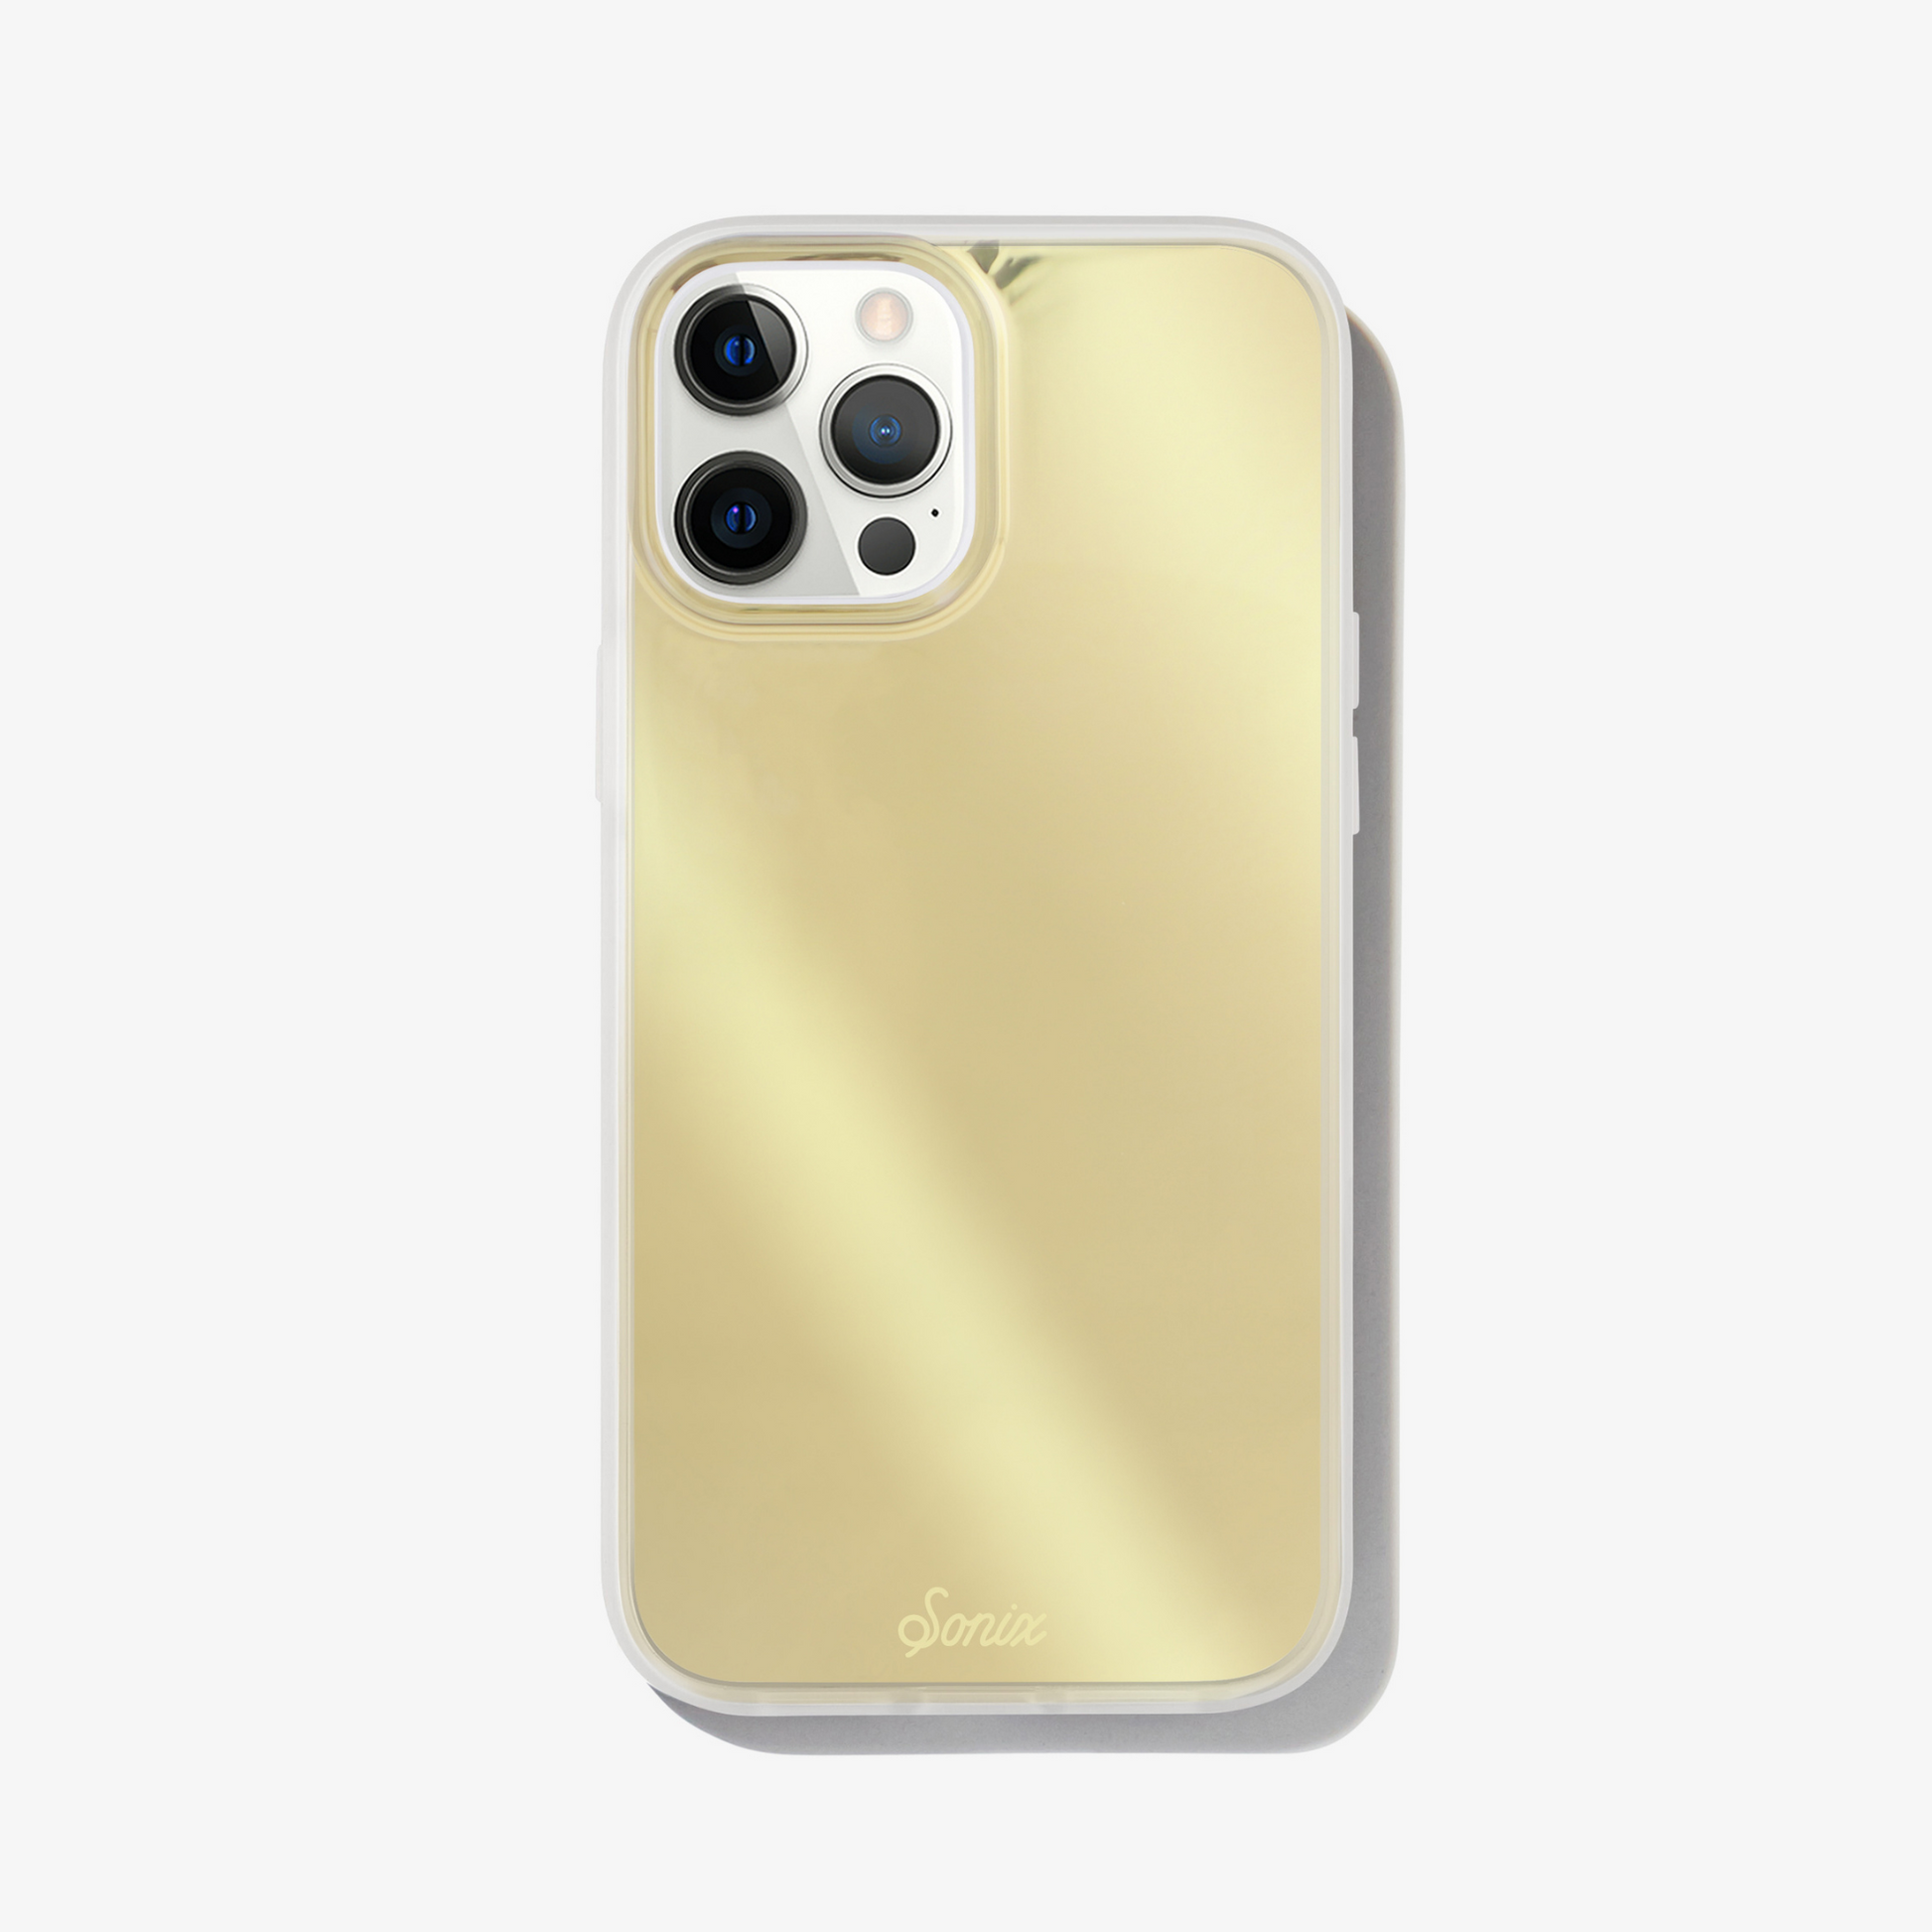 a metallic gold design shown on an iphone 12 pro max